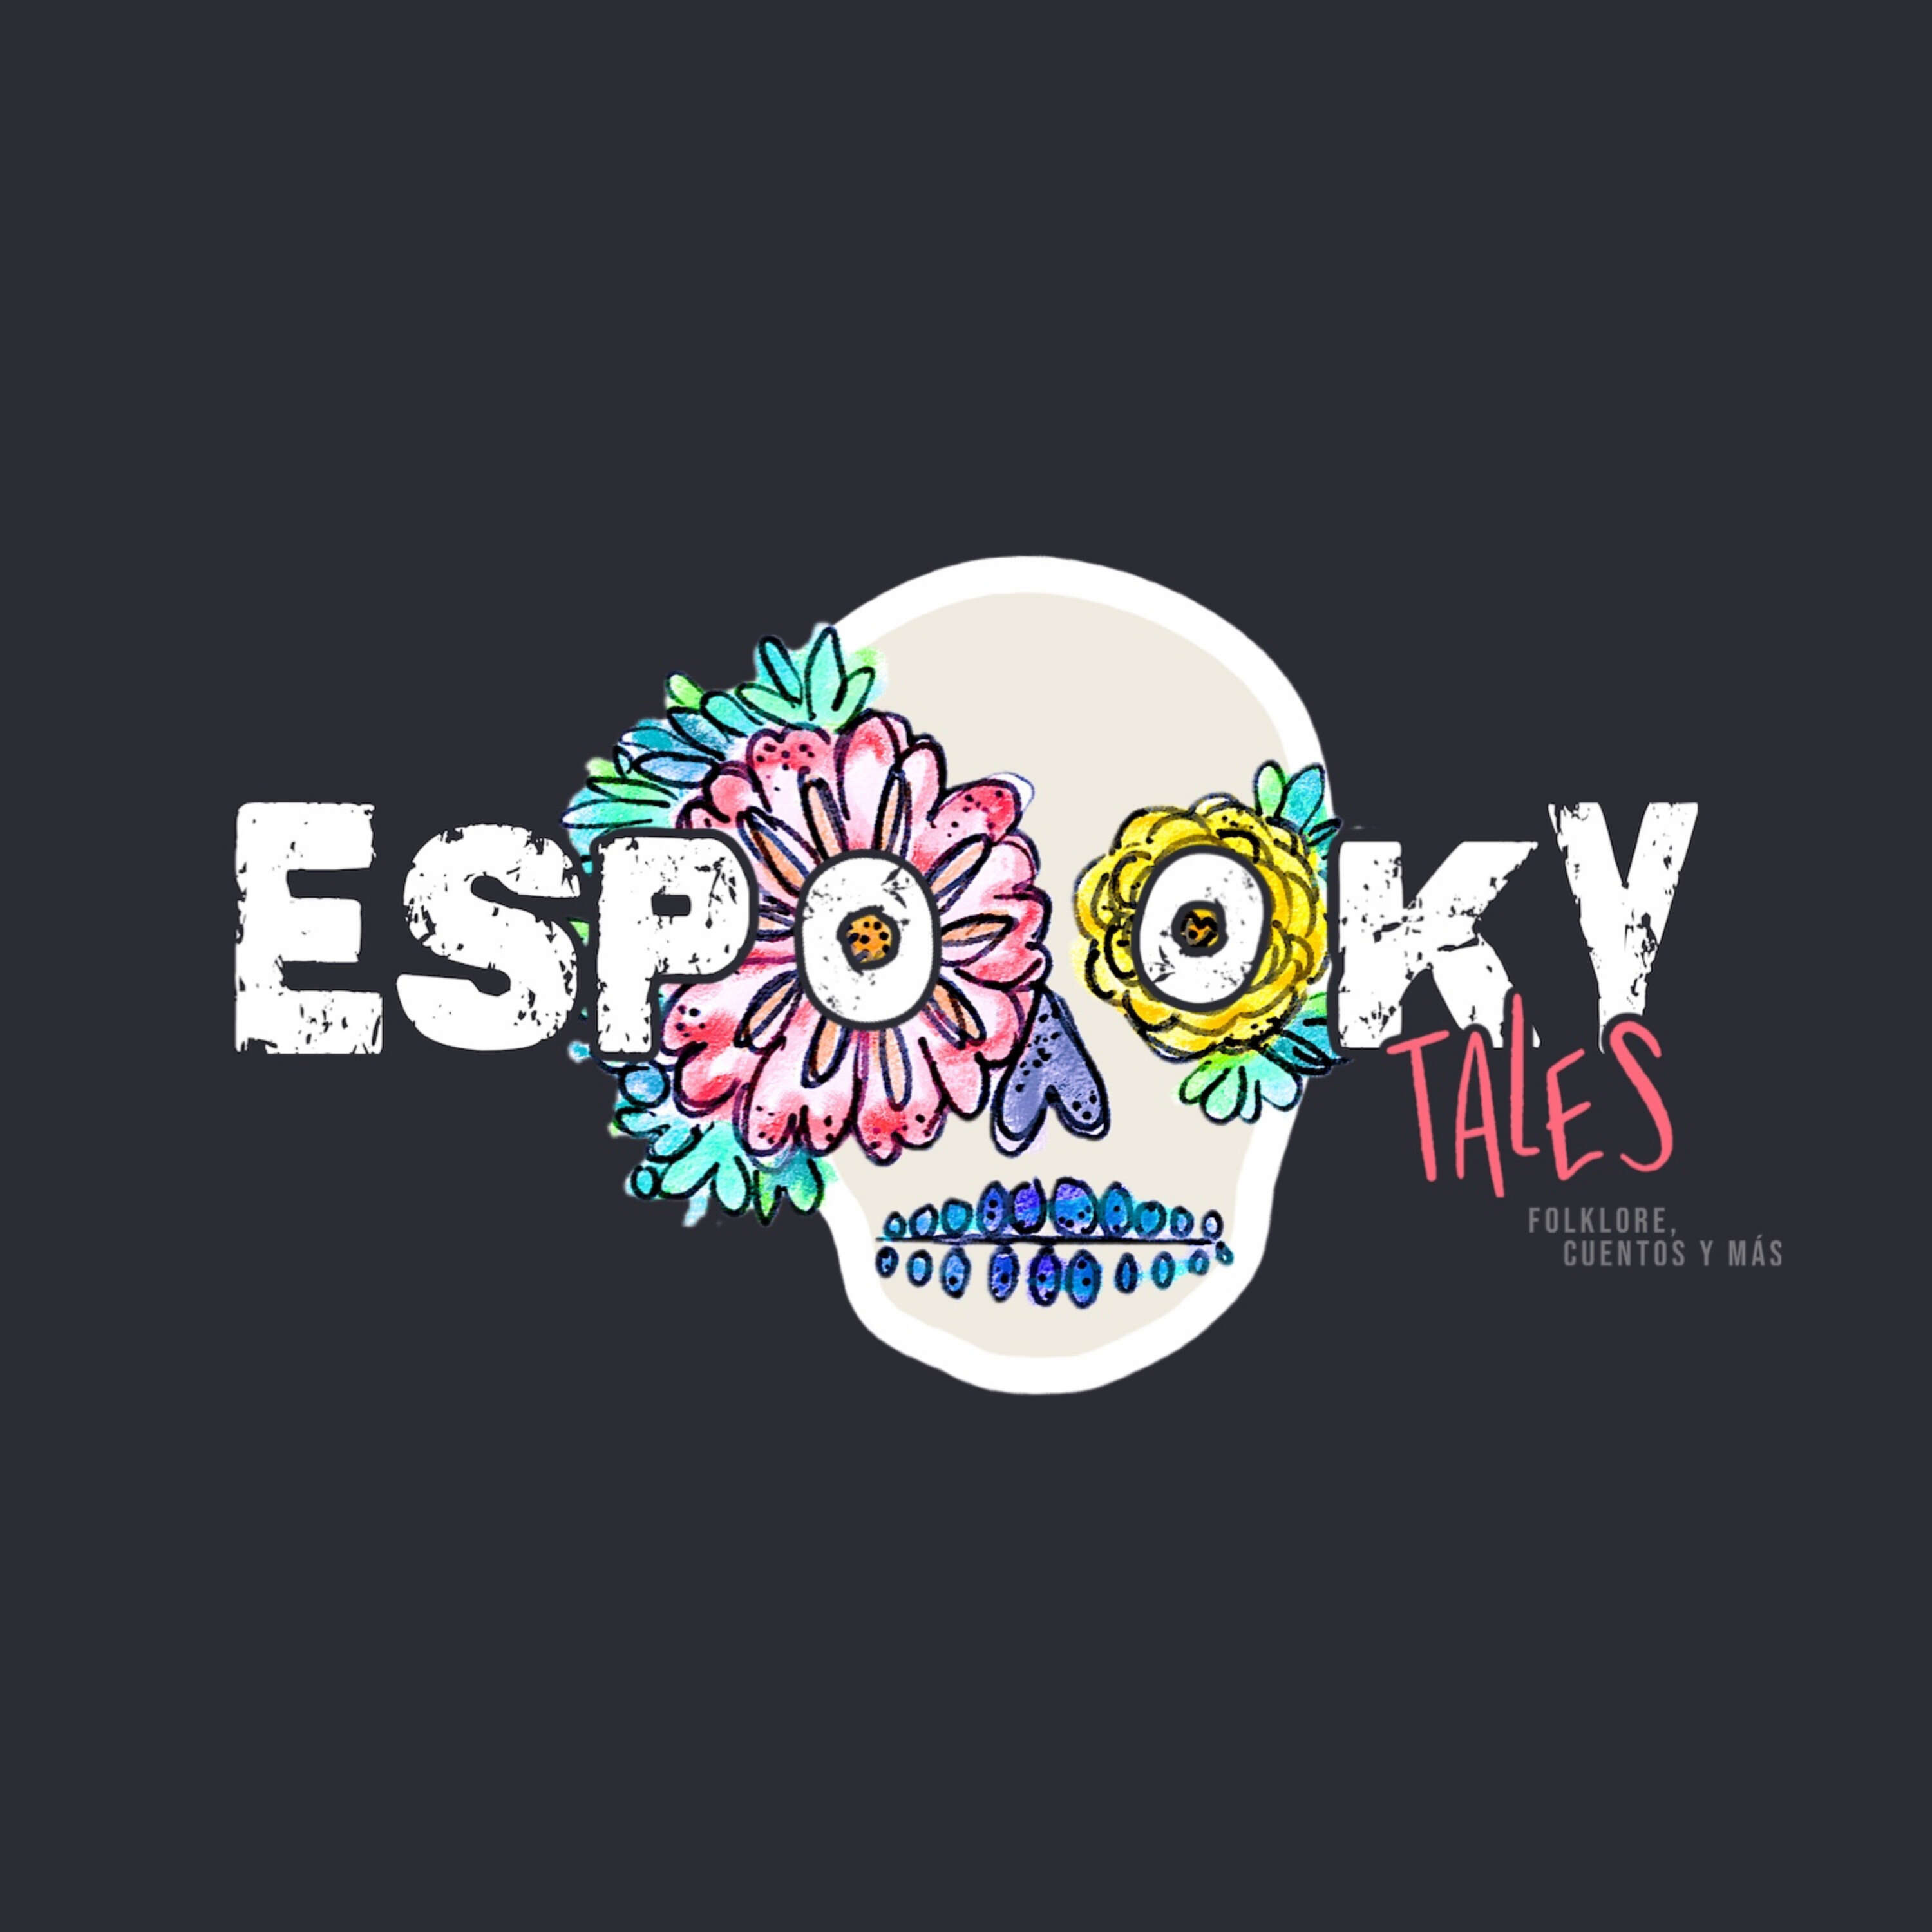 Artwork for podcast Espooky Tales